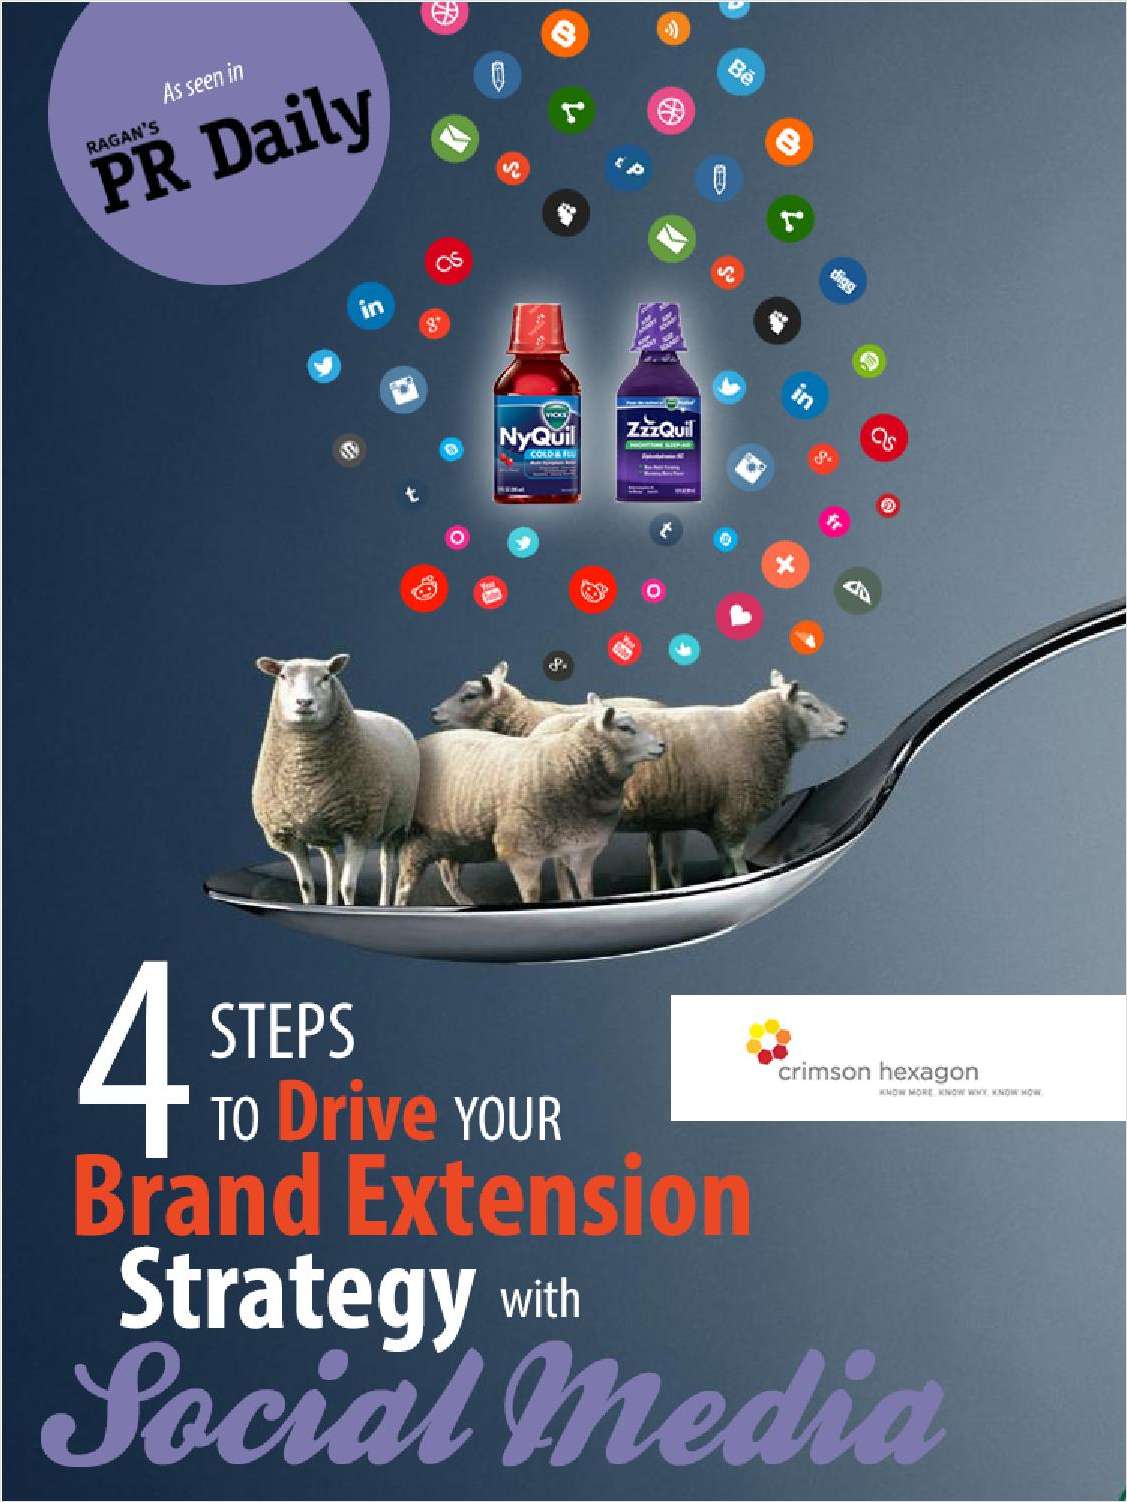 4 Steps to Drive Your Brand Extension with Social Media